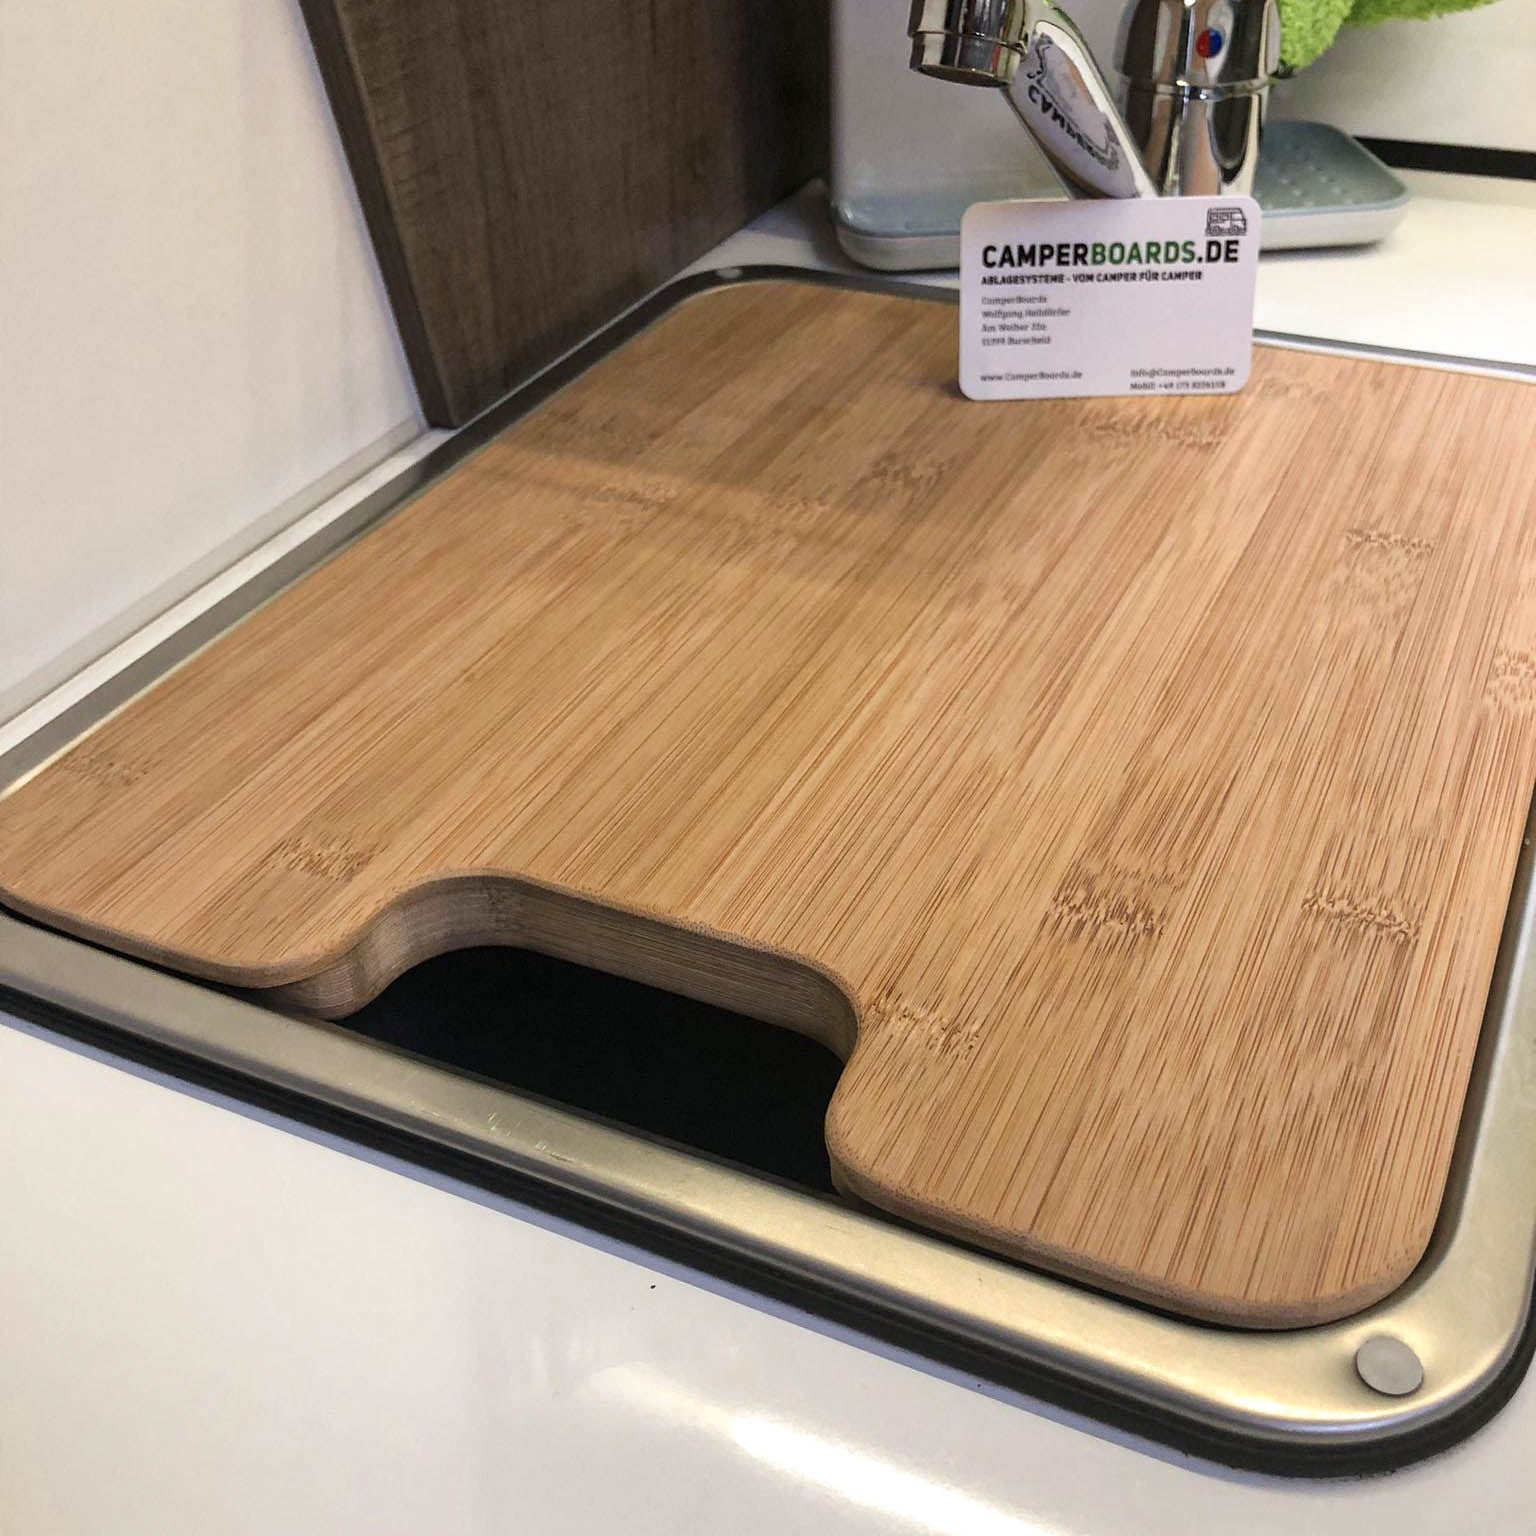 Cutting board with sink cover for Mooveo models